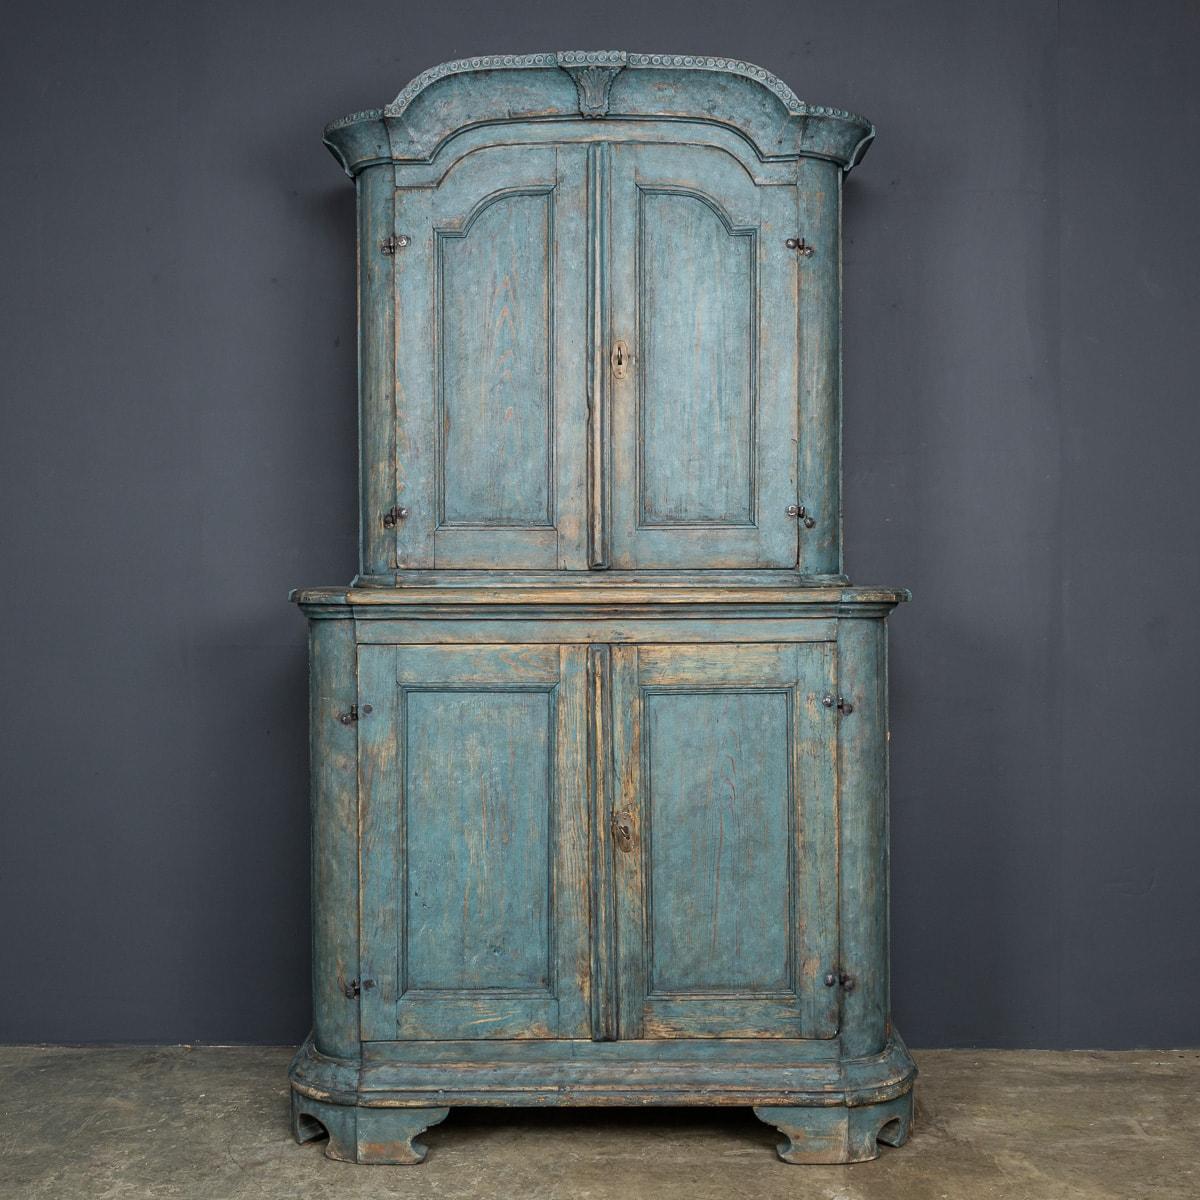 Antique 19th Century French pine cupboard, painted in a deep blue hue showcases brilliant craftsmanship. Complete with two drawers, shelves, and a plate rack in the top cupboard, and additional shelves inside the bottom cupboard, it offers ample